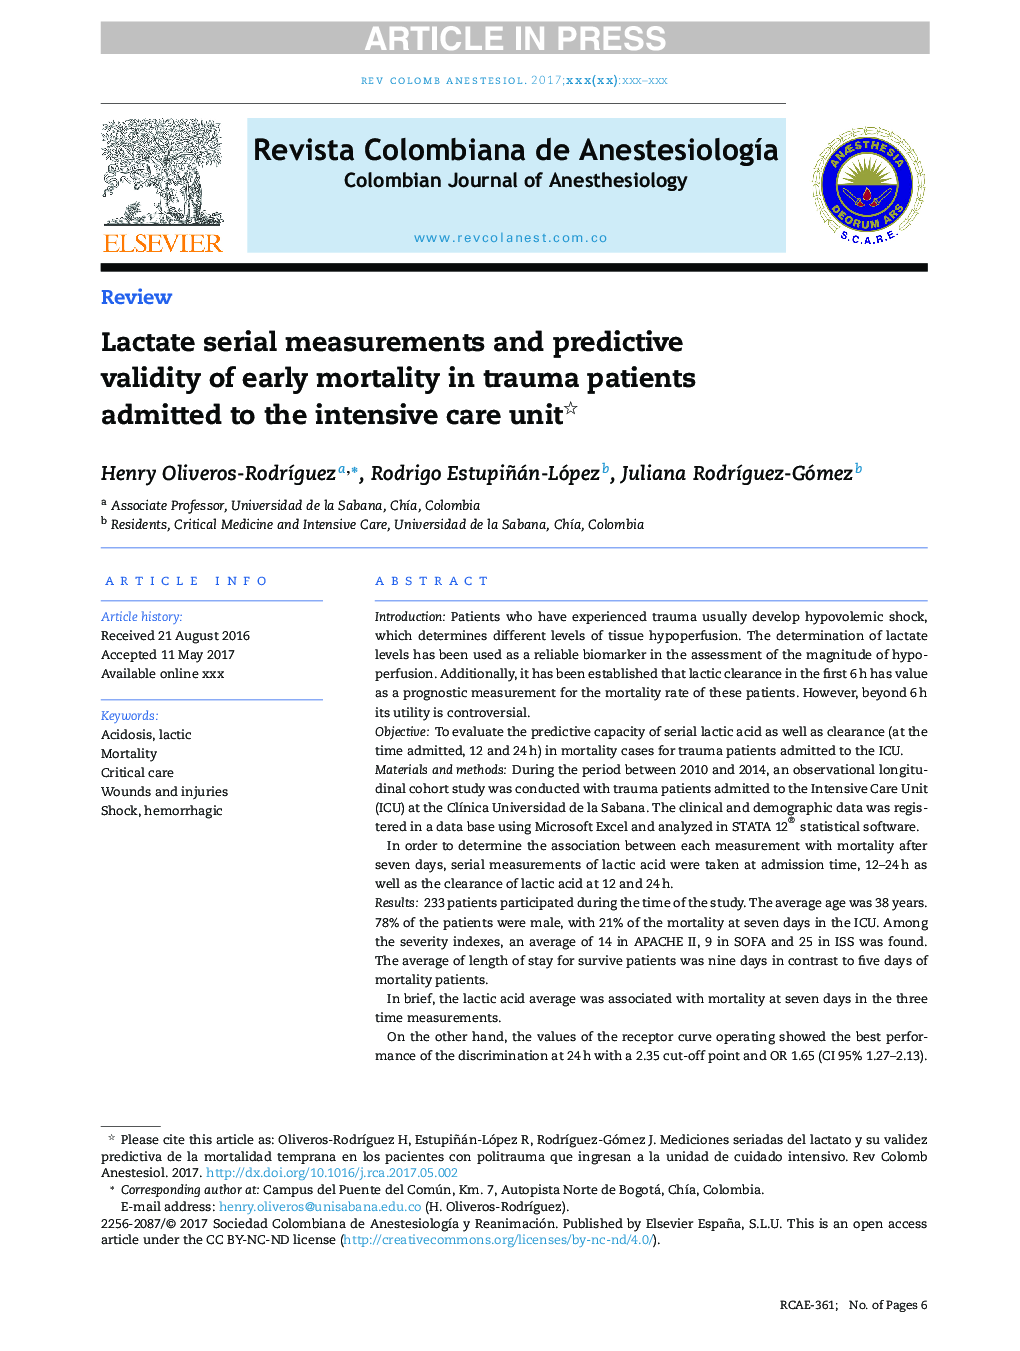 Lactate serial measurements and predictive validity of early mortality in trauma patients admitted to the intensive care unit